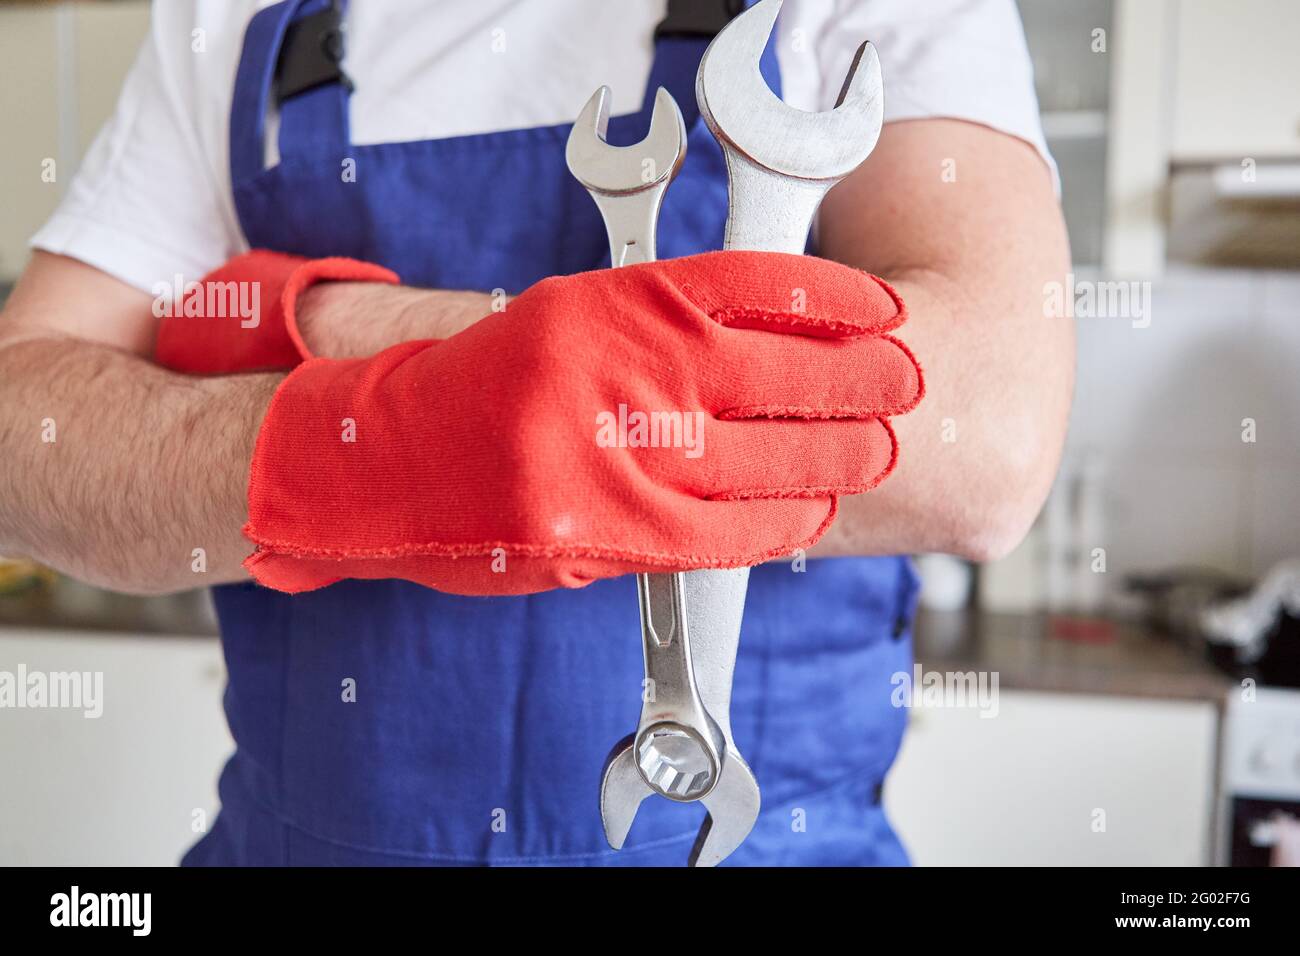 Craftsman with red gloves holds wrench as a symbol of craft Stock Photo